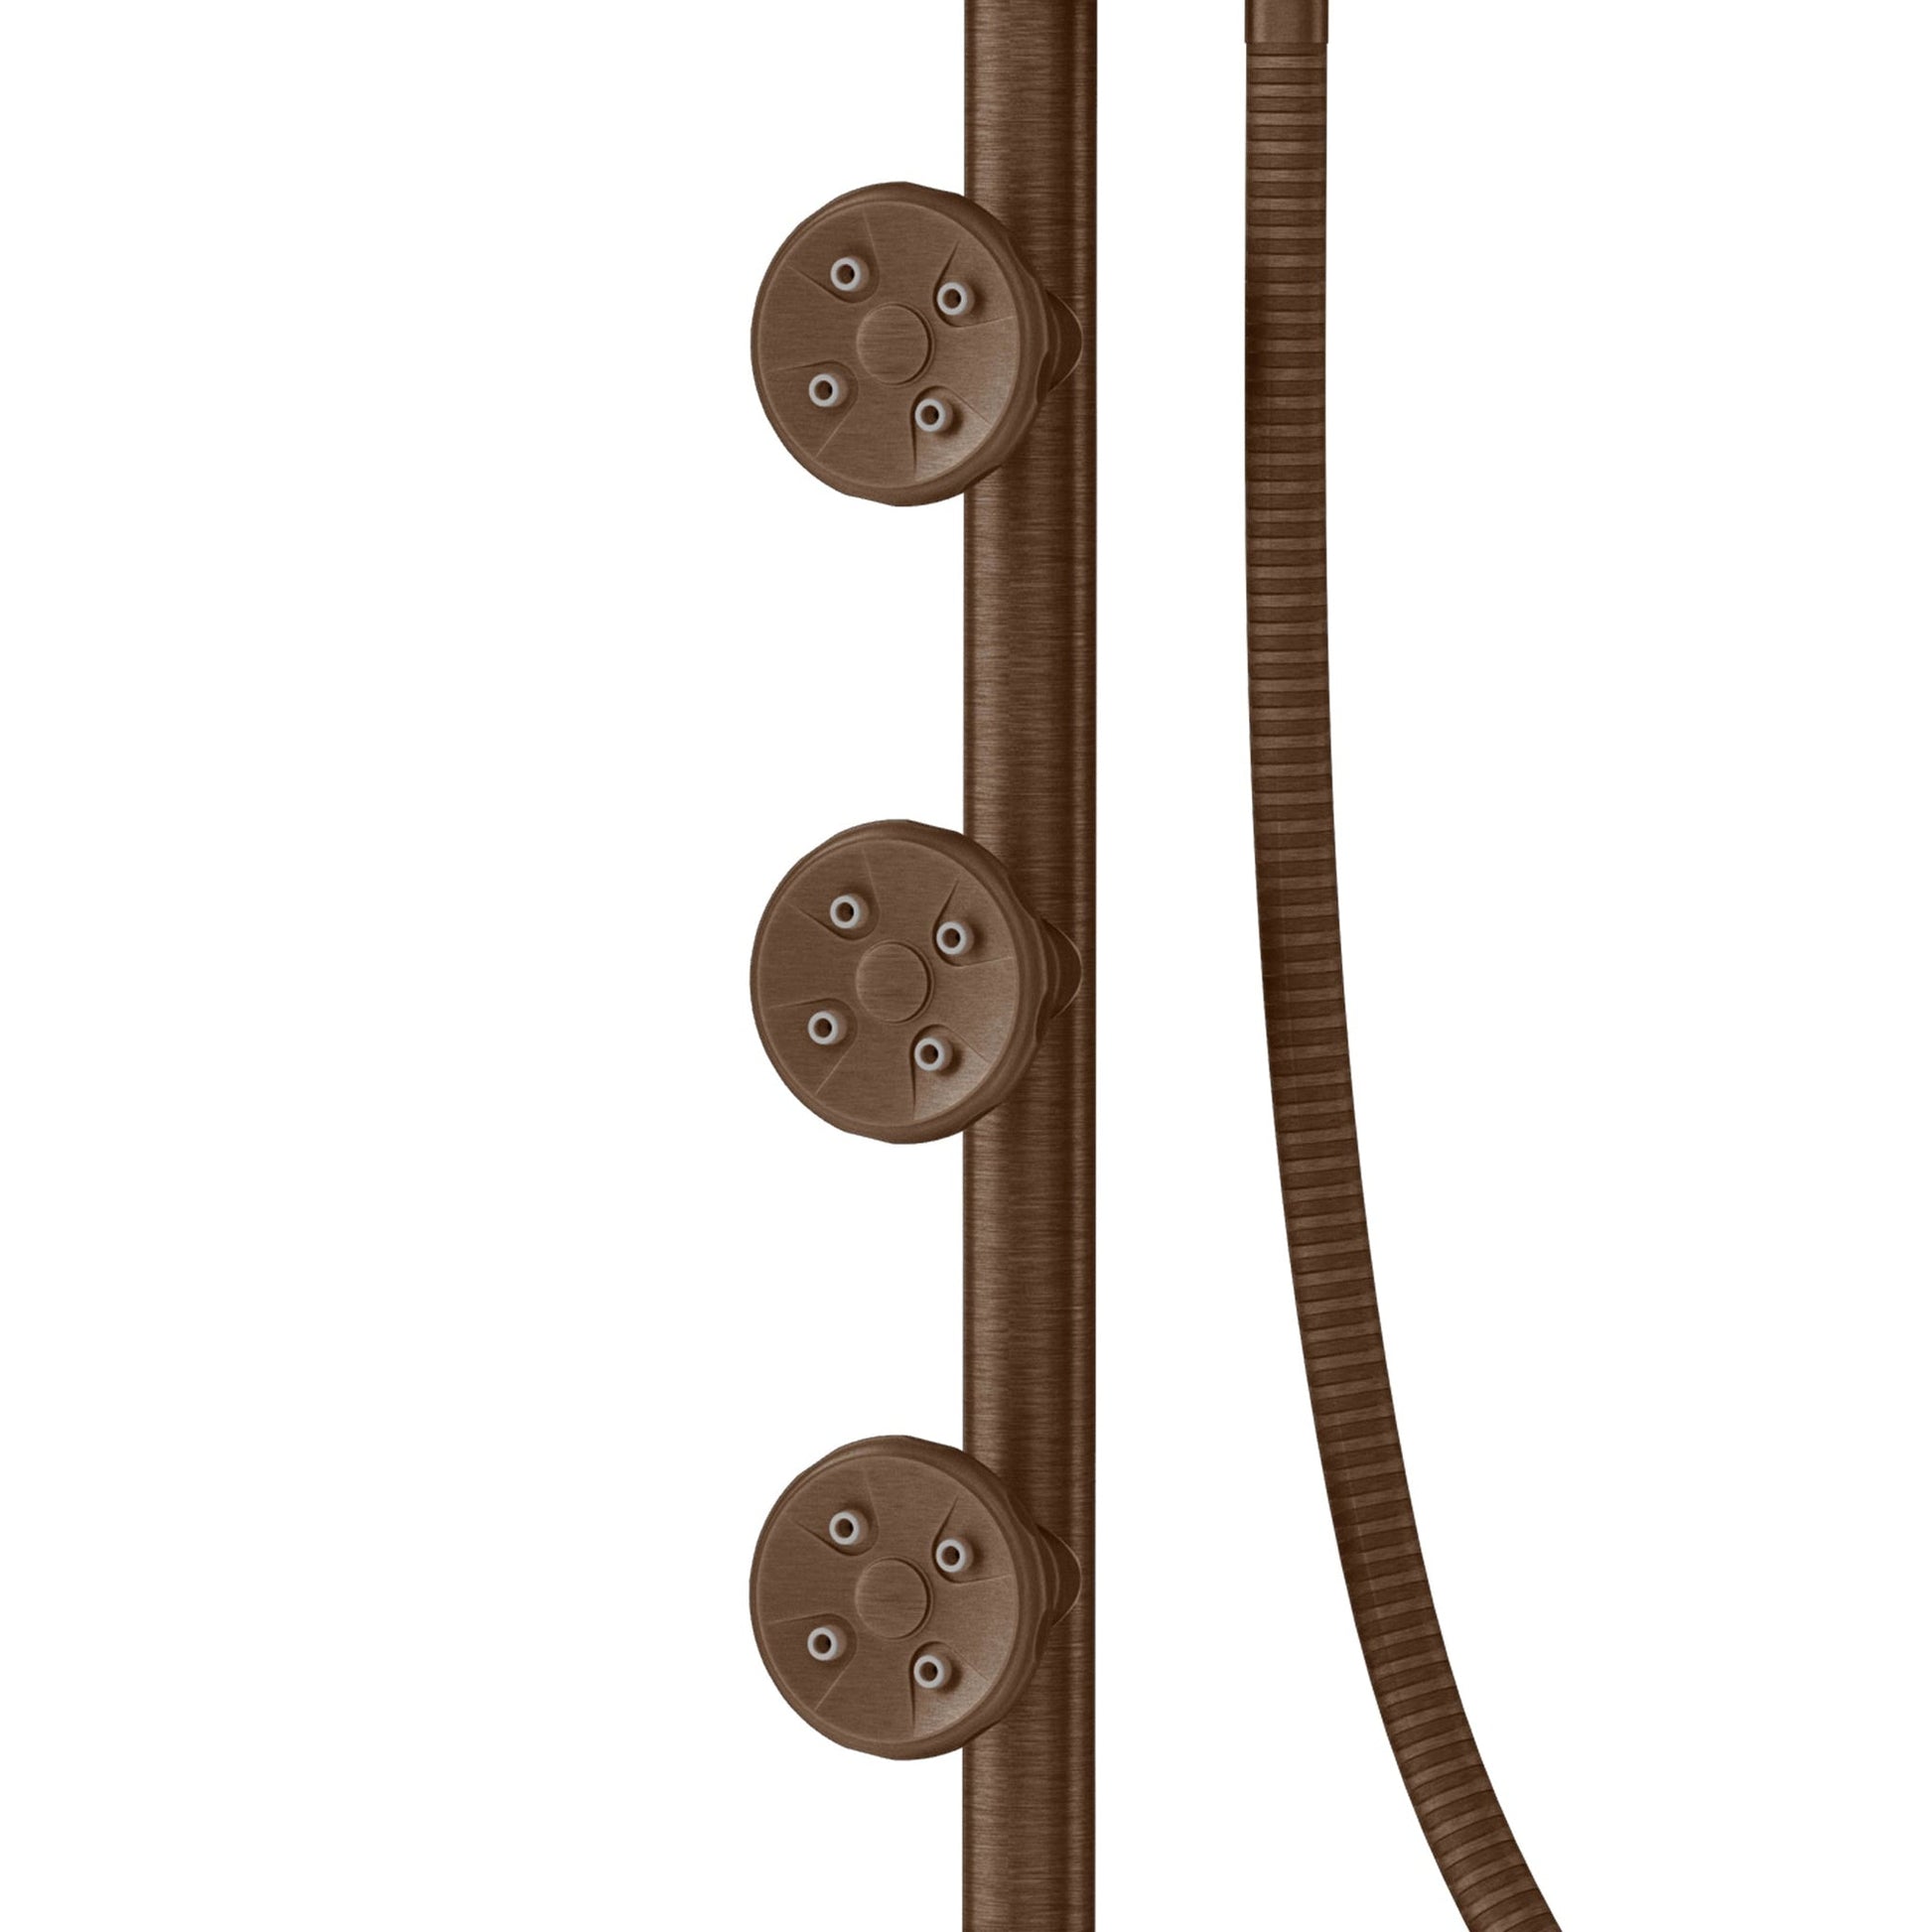 PULSE ShowerSpas Lanai 2.5 GPM Shower System in Oil Rubbed Bronze With 3-Power Spray Body Jets and 3-Function Hand Shower